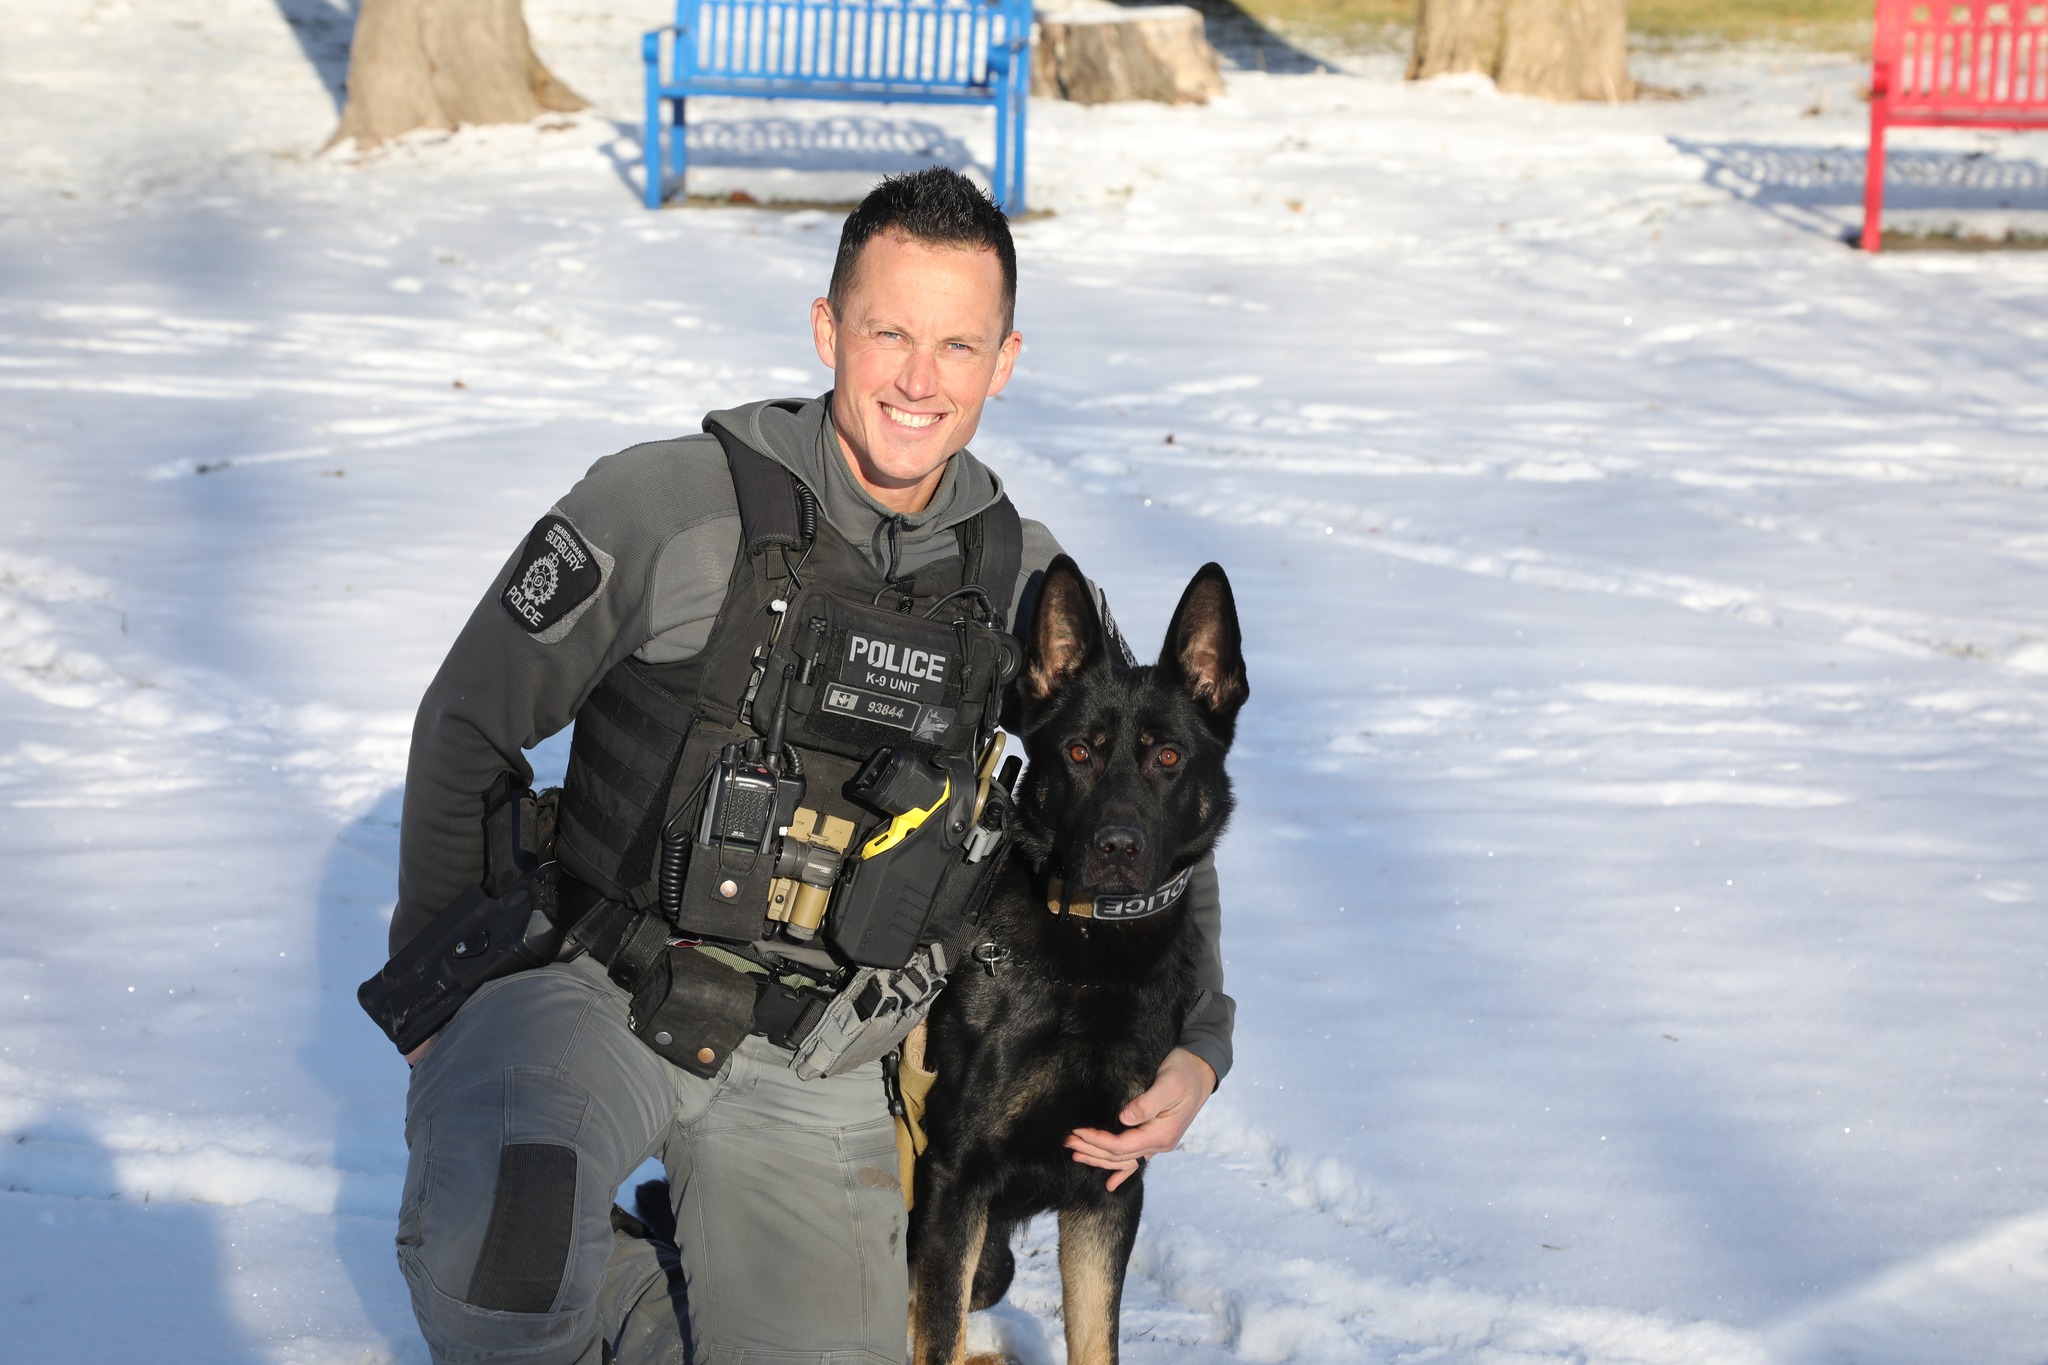 police officer and dog outside in snow